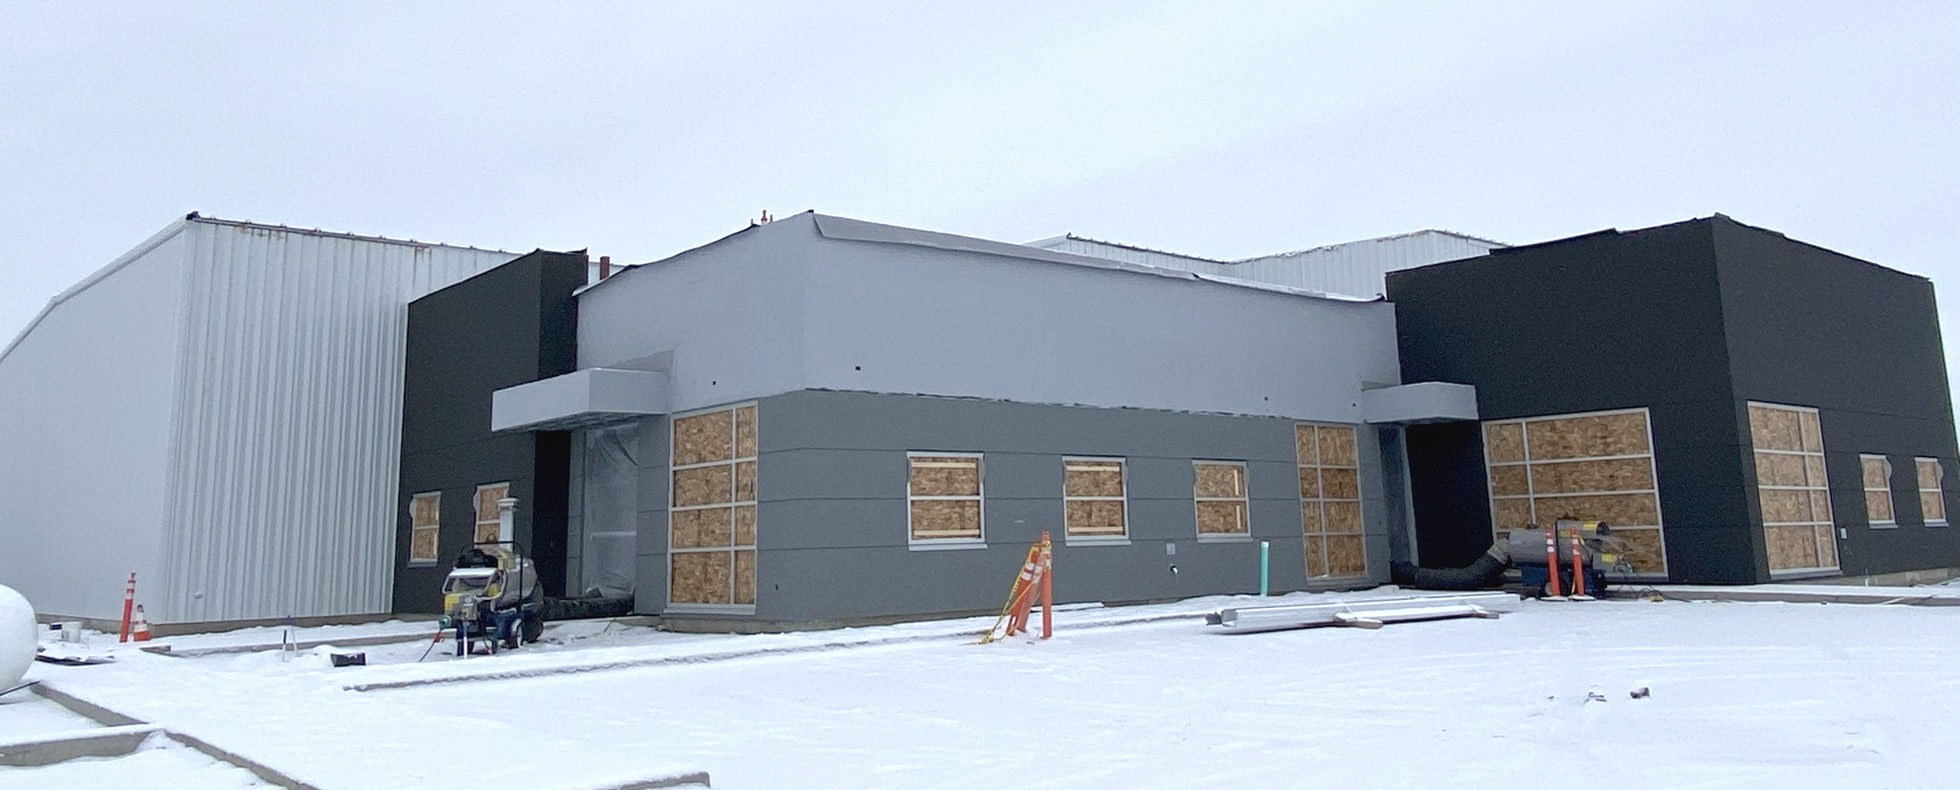 Construction Update, December: RDO Equipment Co. in Moses Lake, Washington